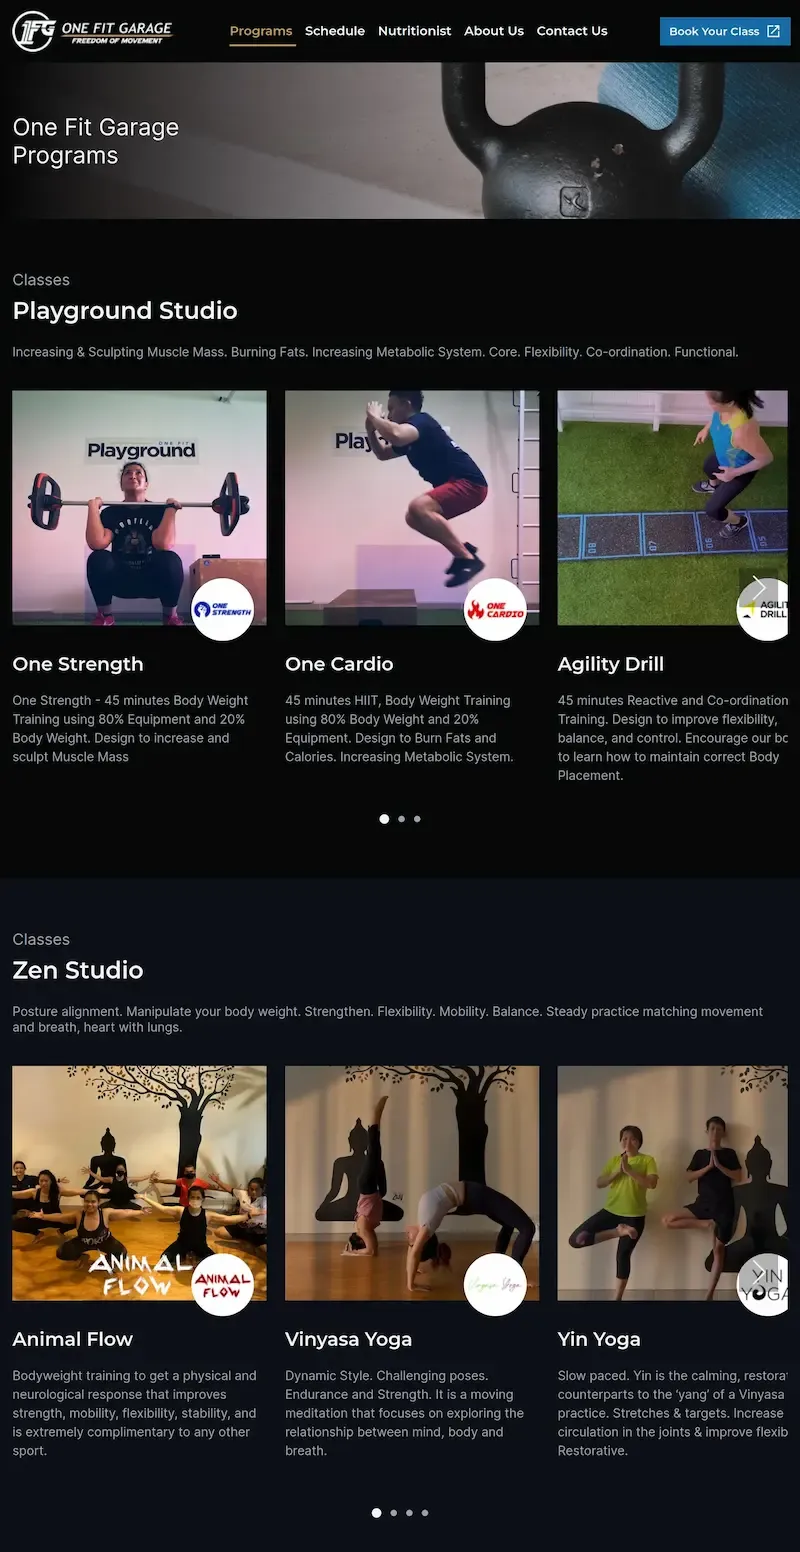 A screenshot of the Programs page of One Fit Garage's website shows various classes of the Playground and Zen studios.